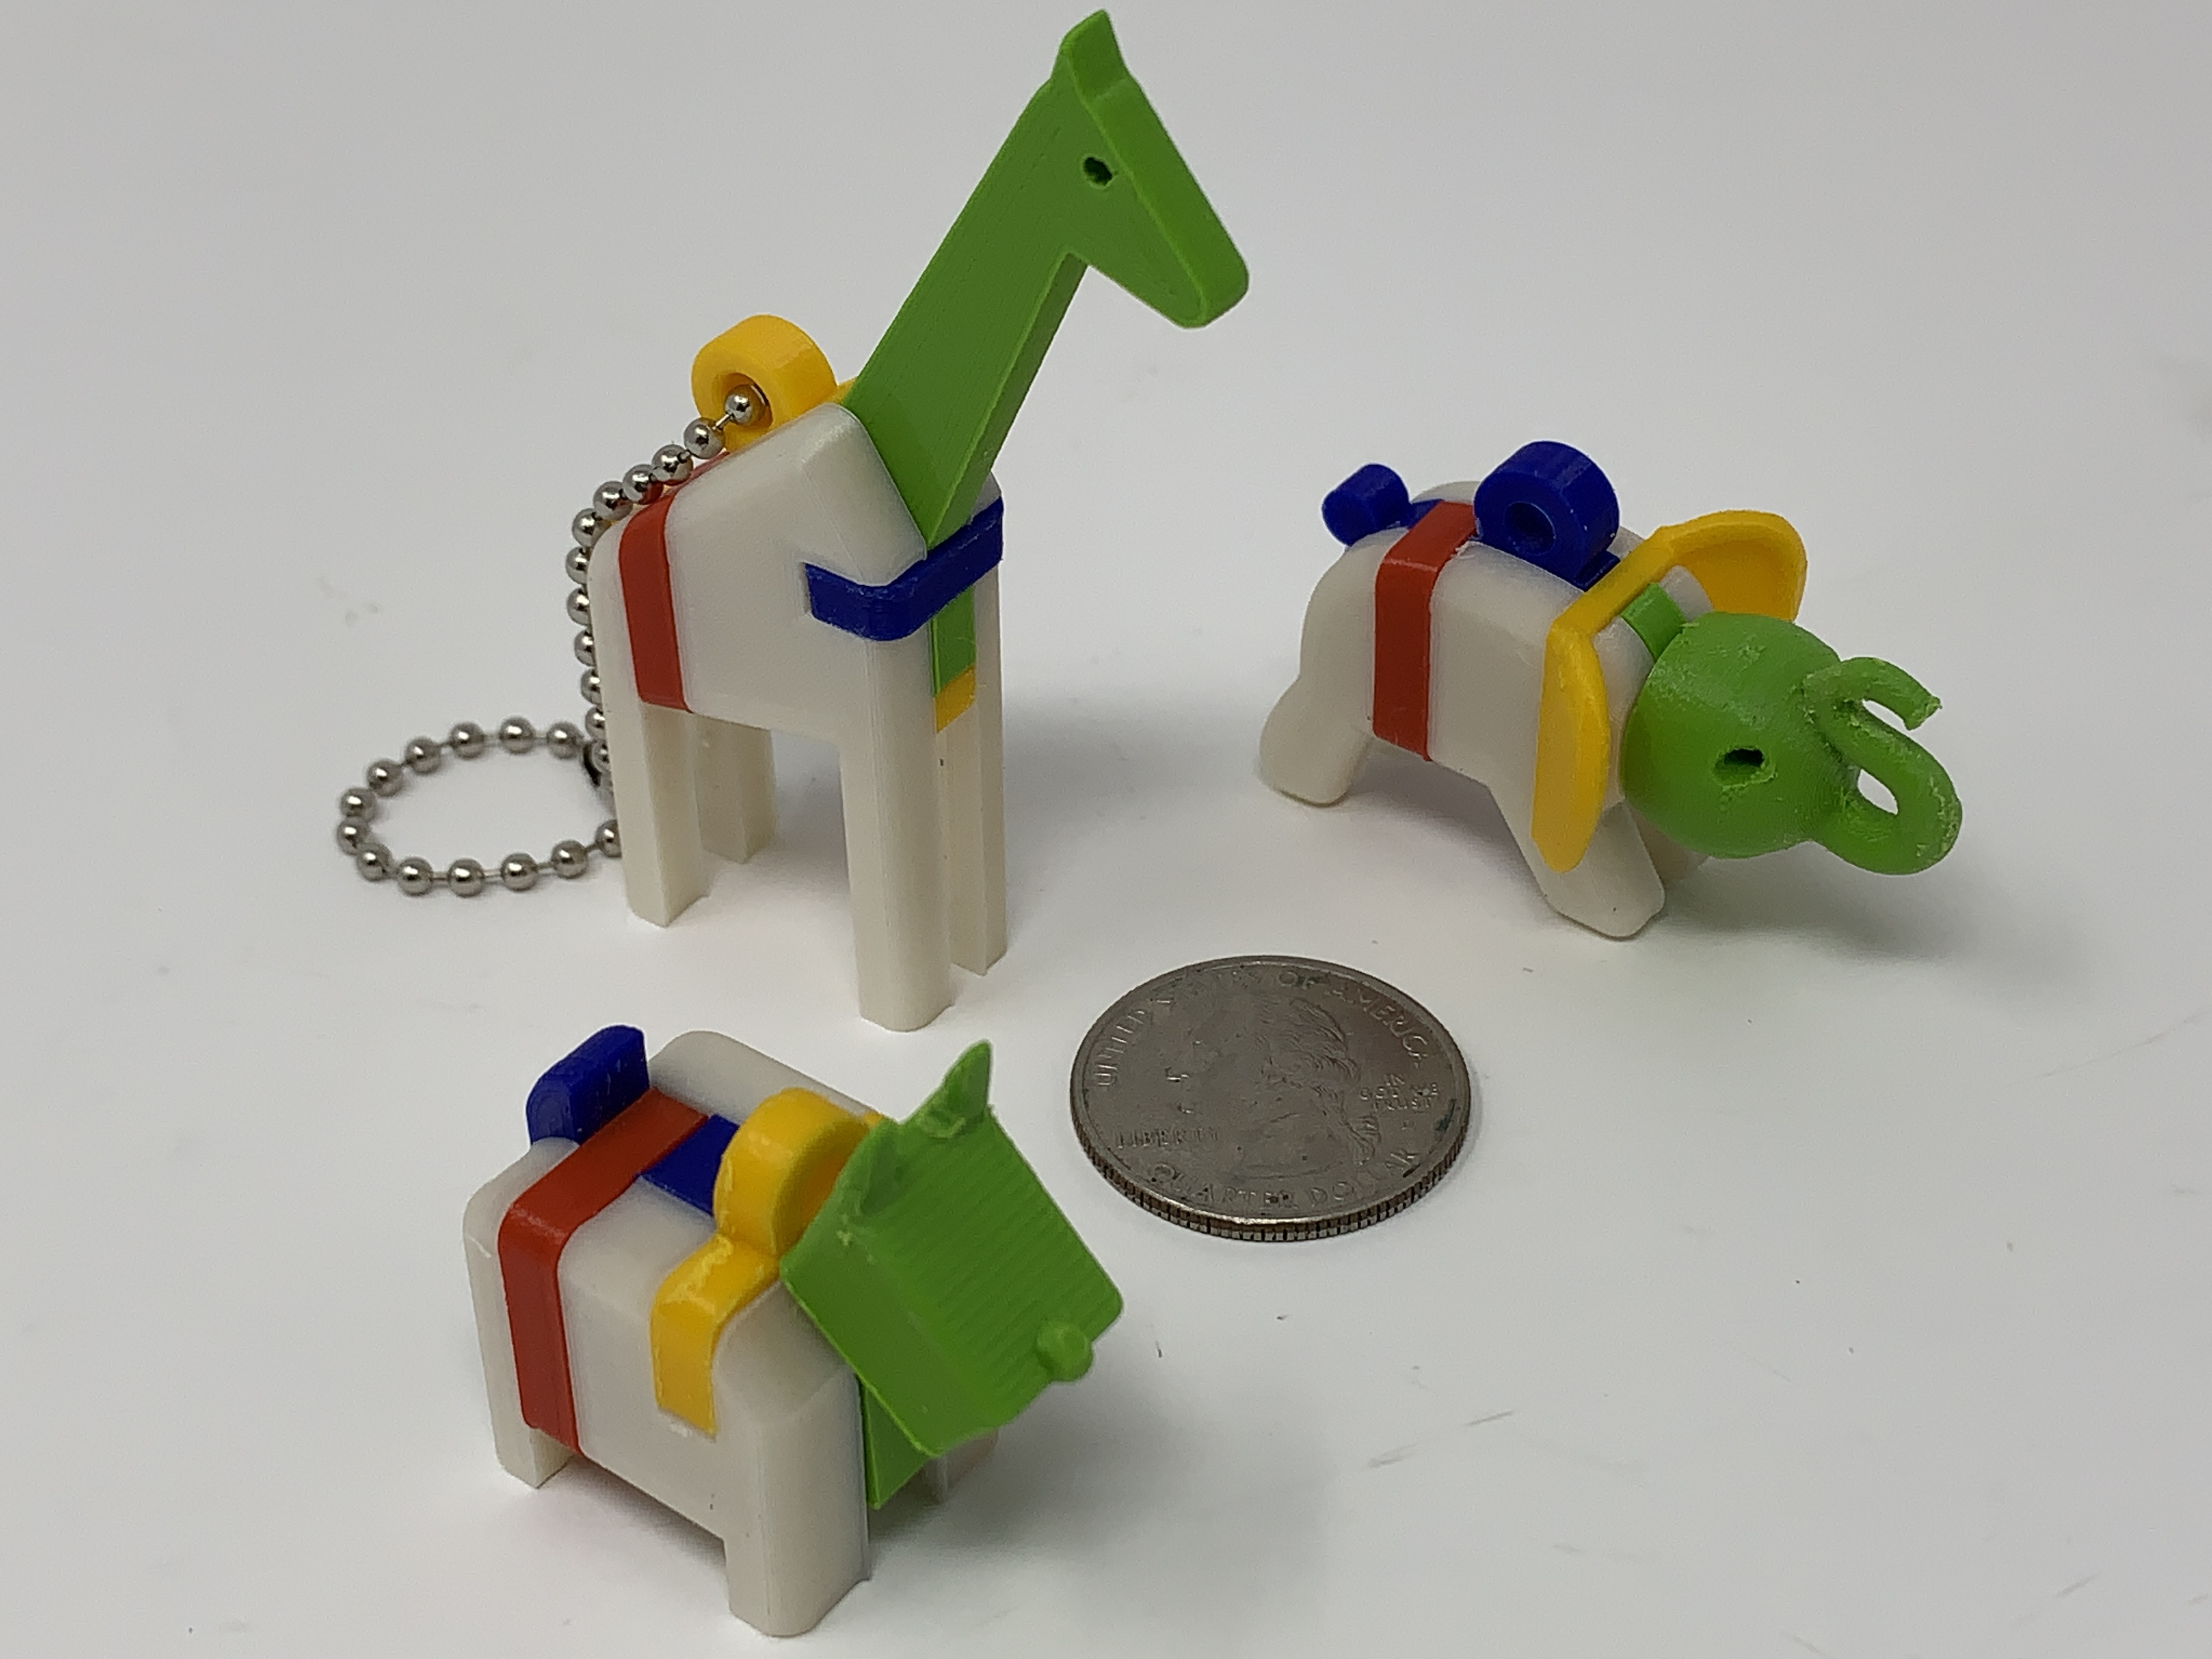 A Trio of "Keychain Puzzles".